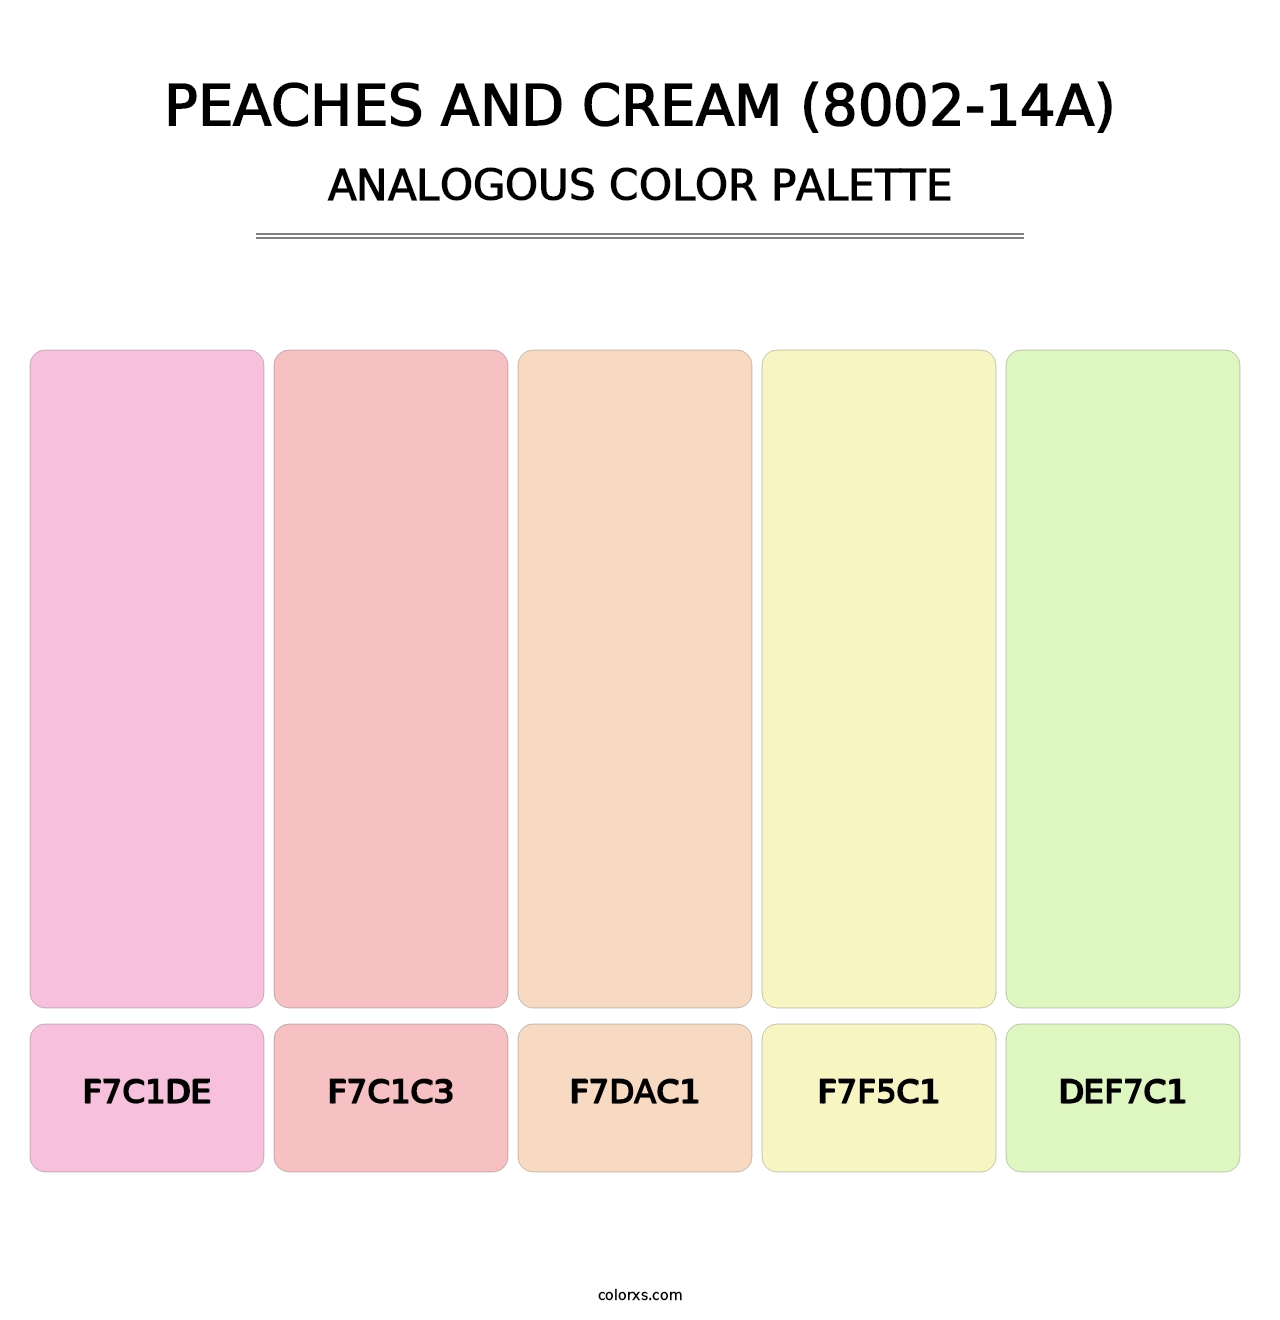 Peaches and Cream (8002-14A) - Analogous Color Palette